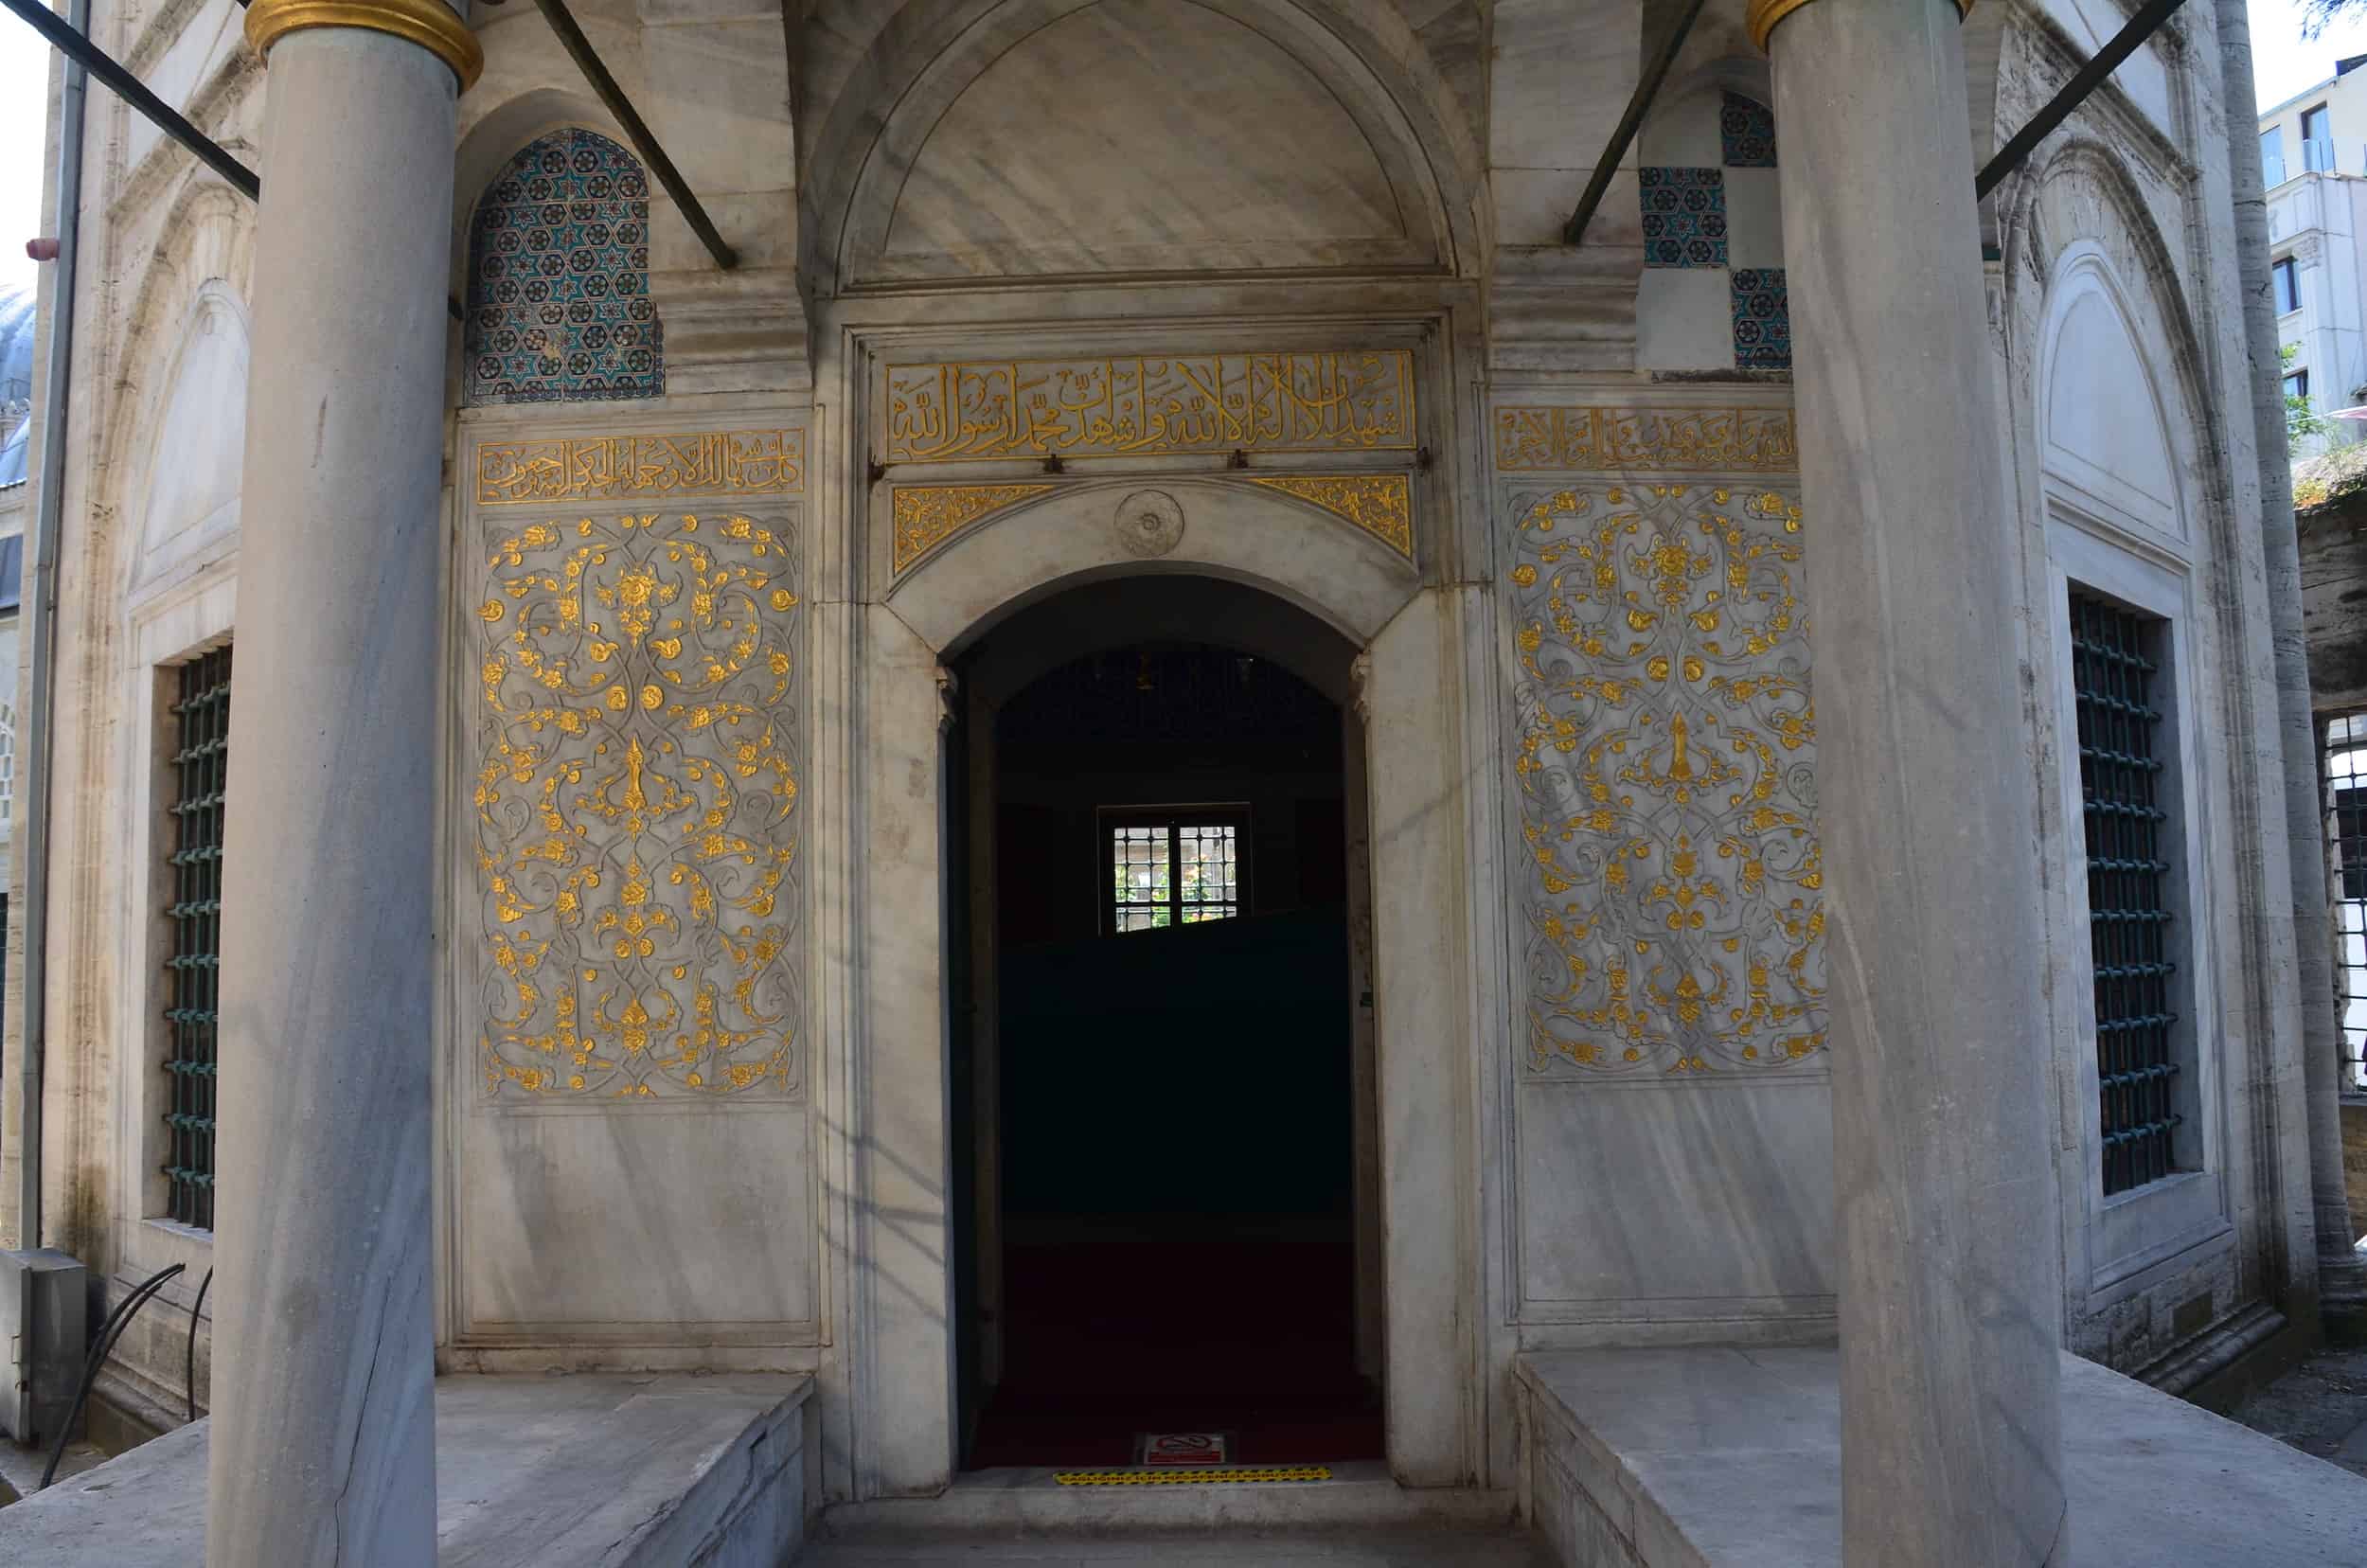 Entrance to the tomb of Damat Ibrahim Pasha at the Şehzade Mosque Complex in Istanbul, Turkey